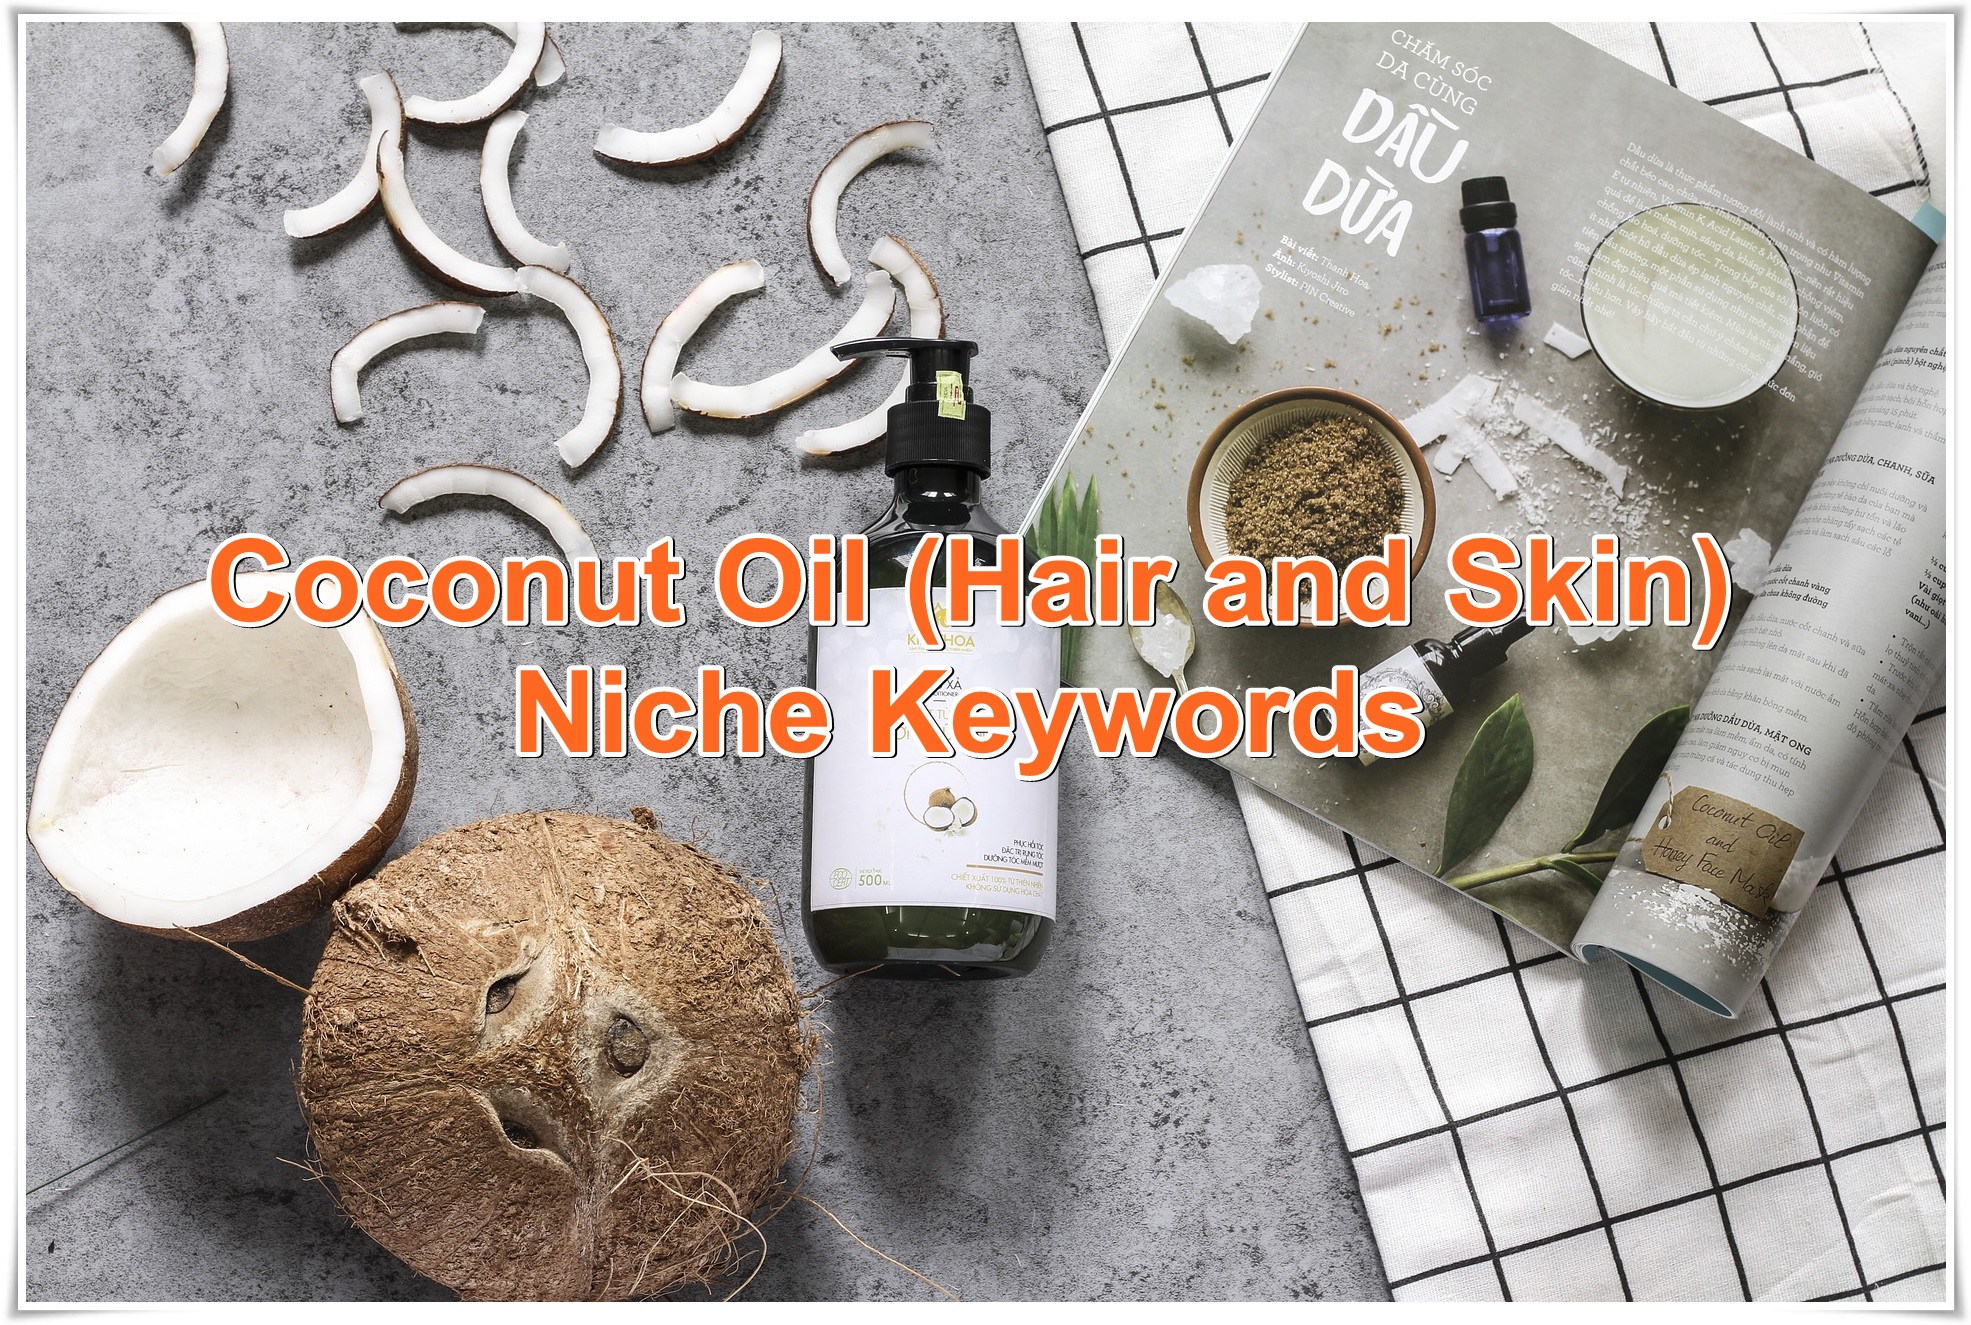 Niche keywords research Coconut Oil (Hair and Skin) 2020 Instant Download